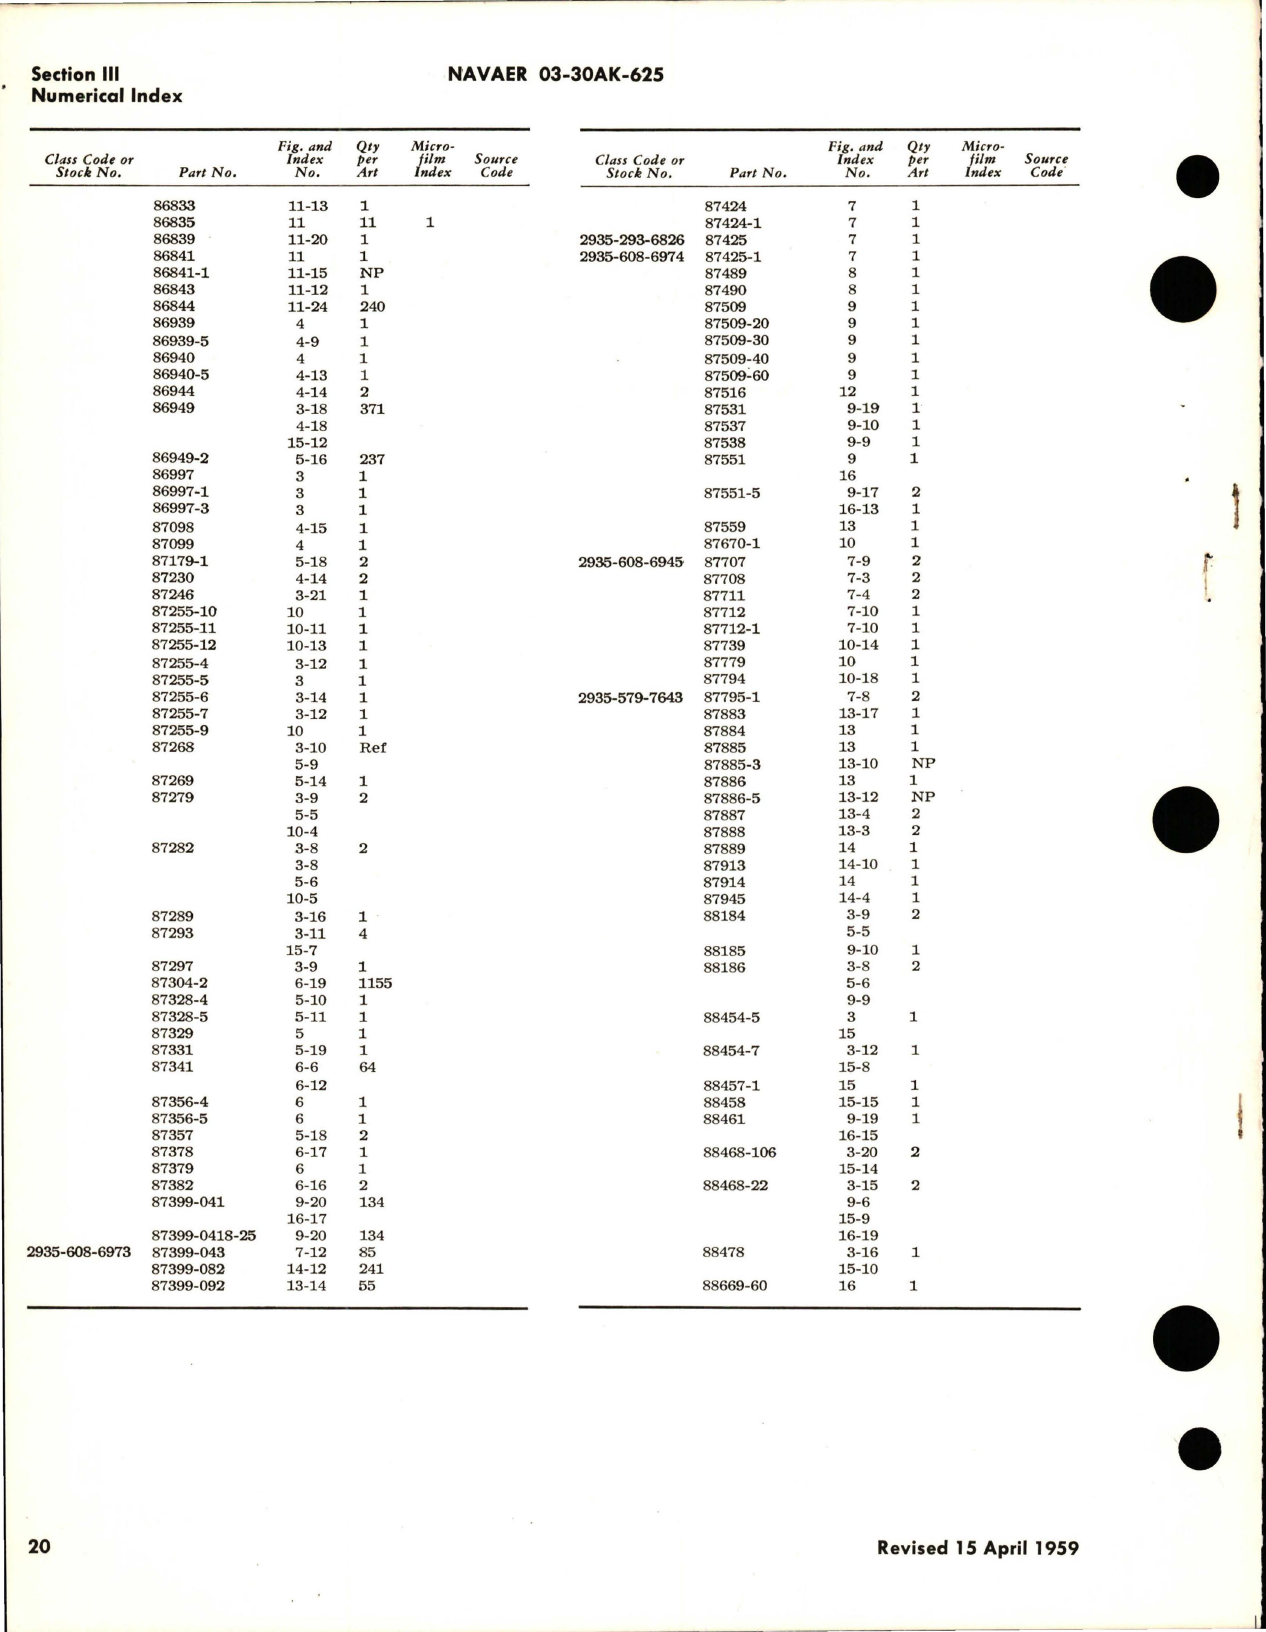 Sample page 5 from AirCorps Library document: Illustrated Parts Breakdown for Oil Coolers, Heat Exchanger, and Fuel Heater